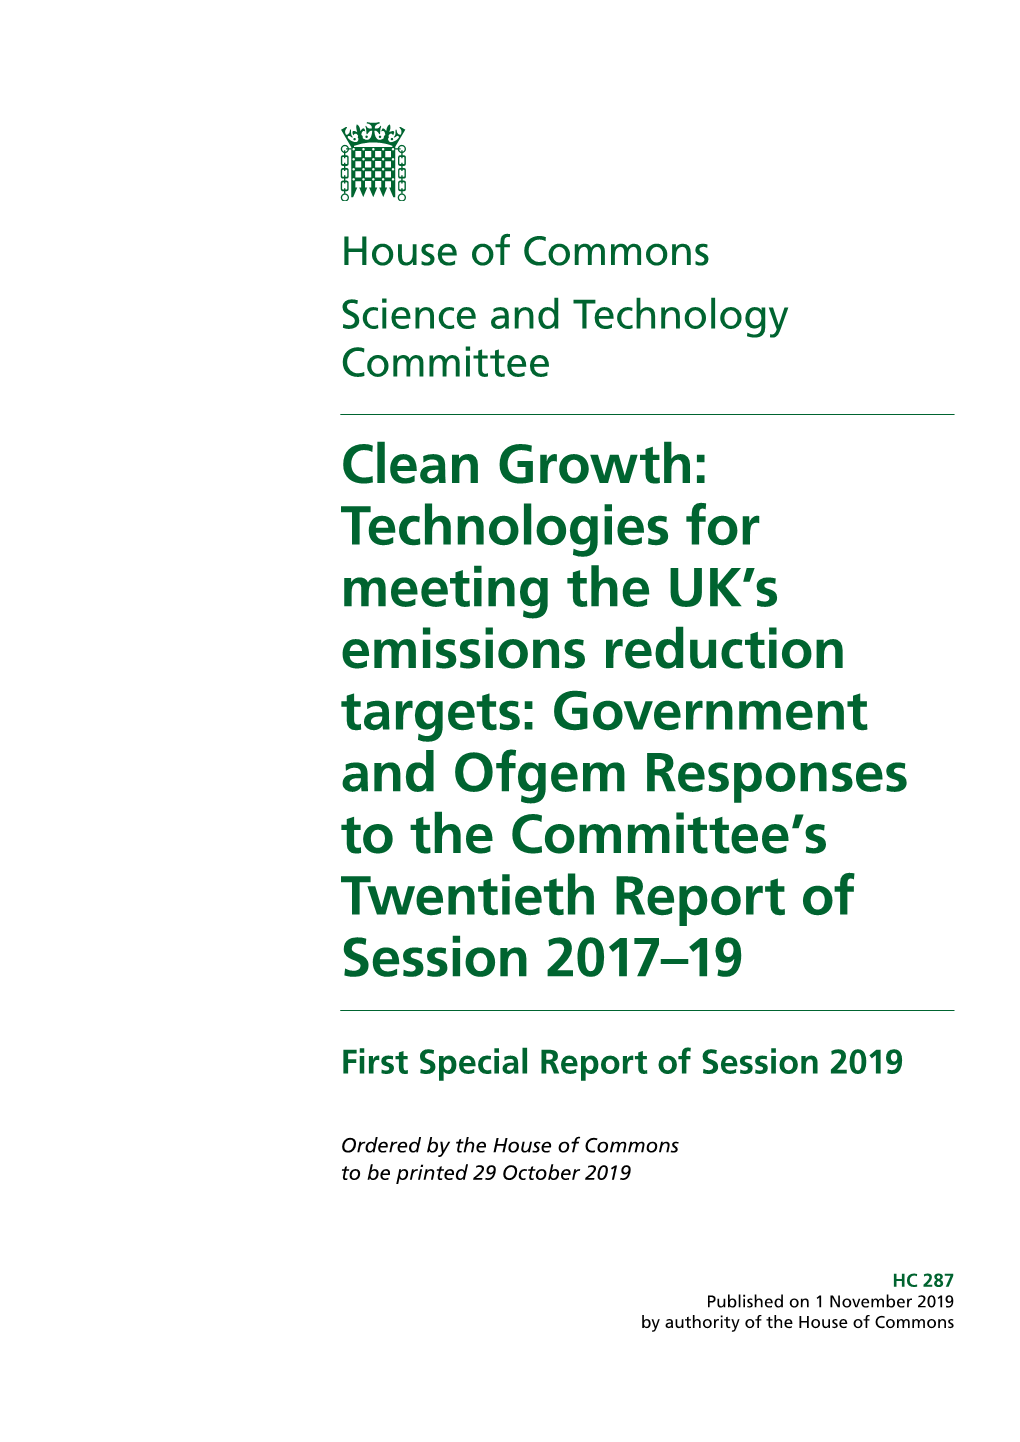 Technologies for Meeting the UK's Emissions Reduction Targets